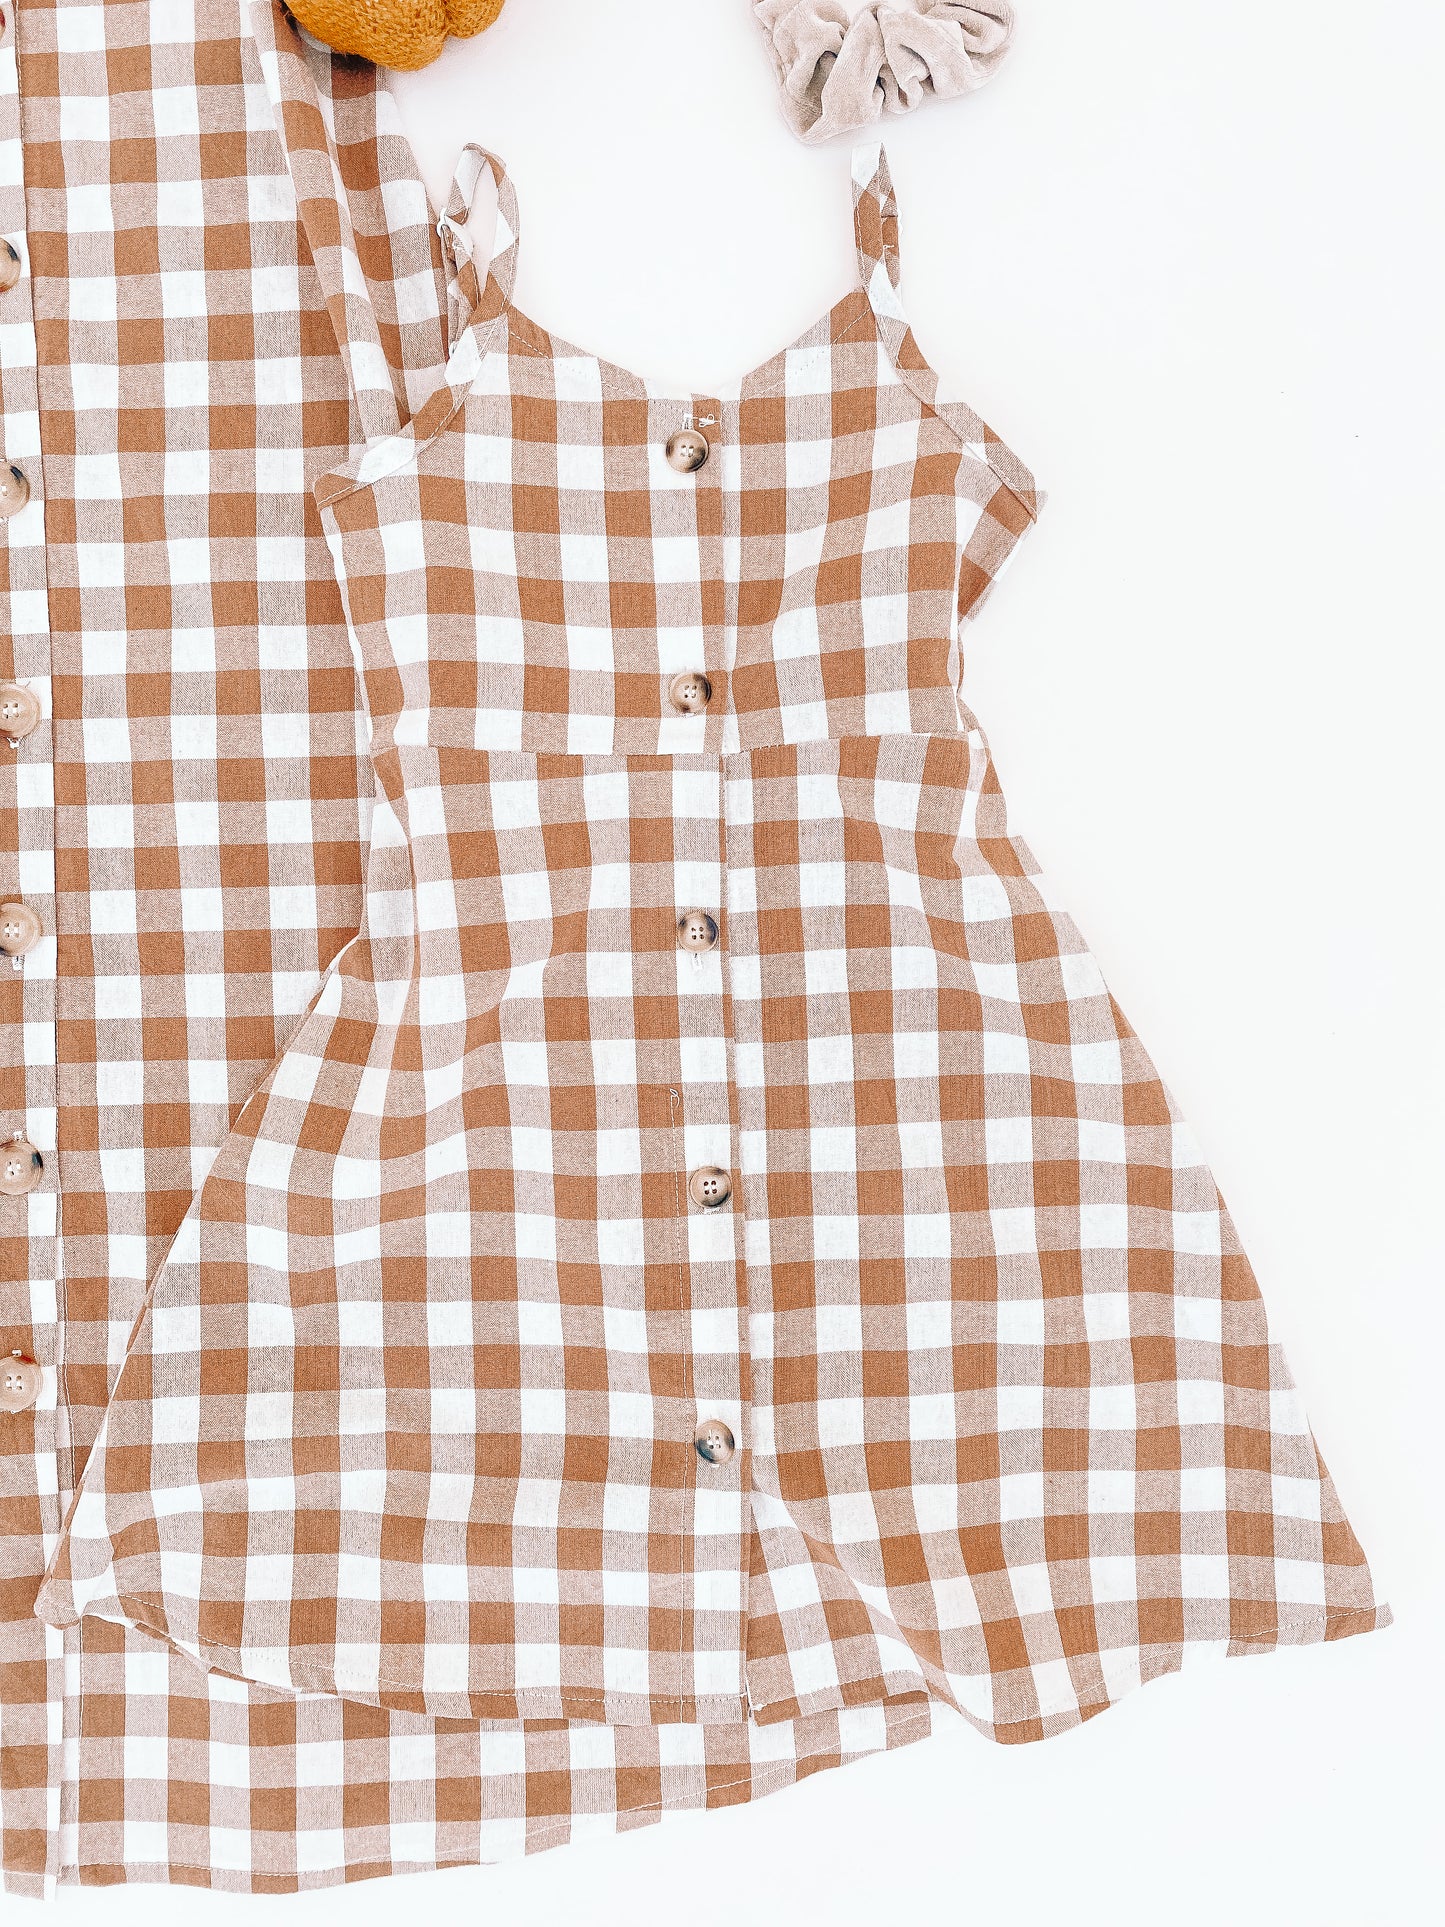  Pattern is a brownish and white checkered pattern. With functional buttons straight in the middle wood like style. 